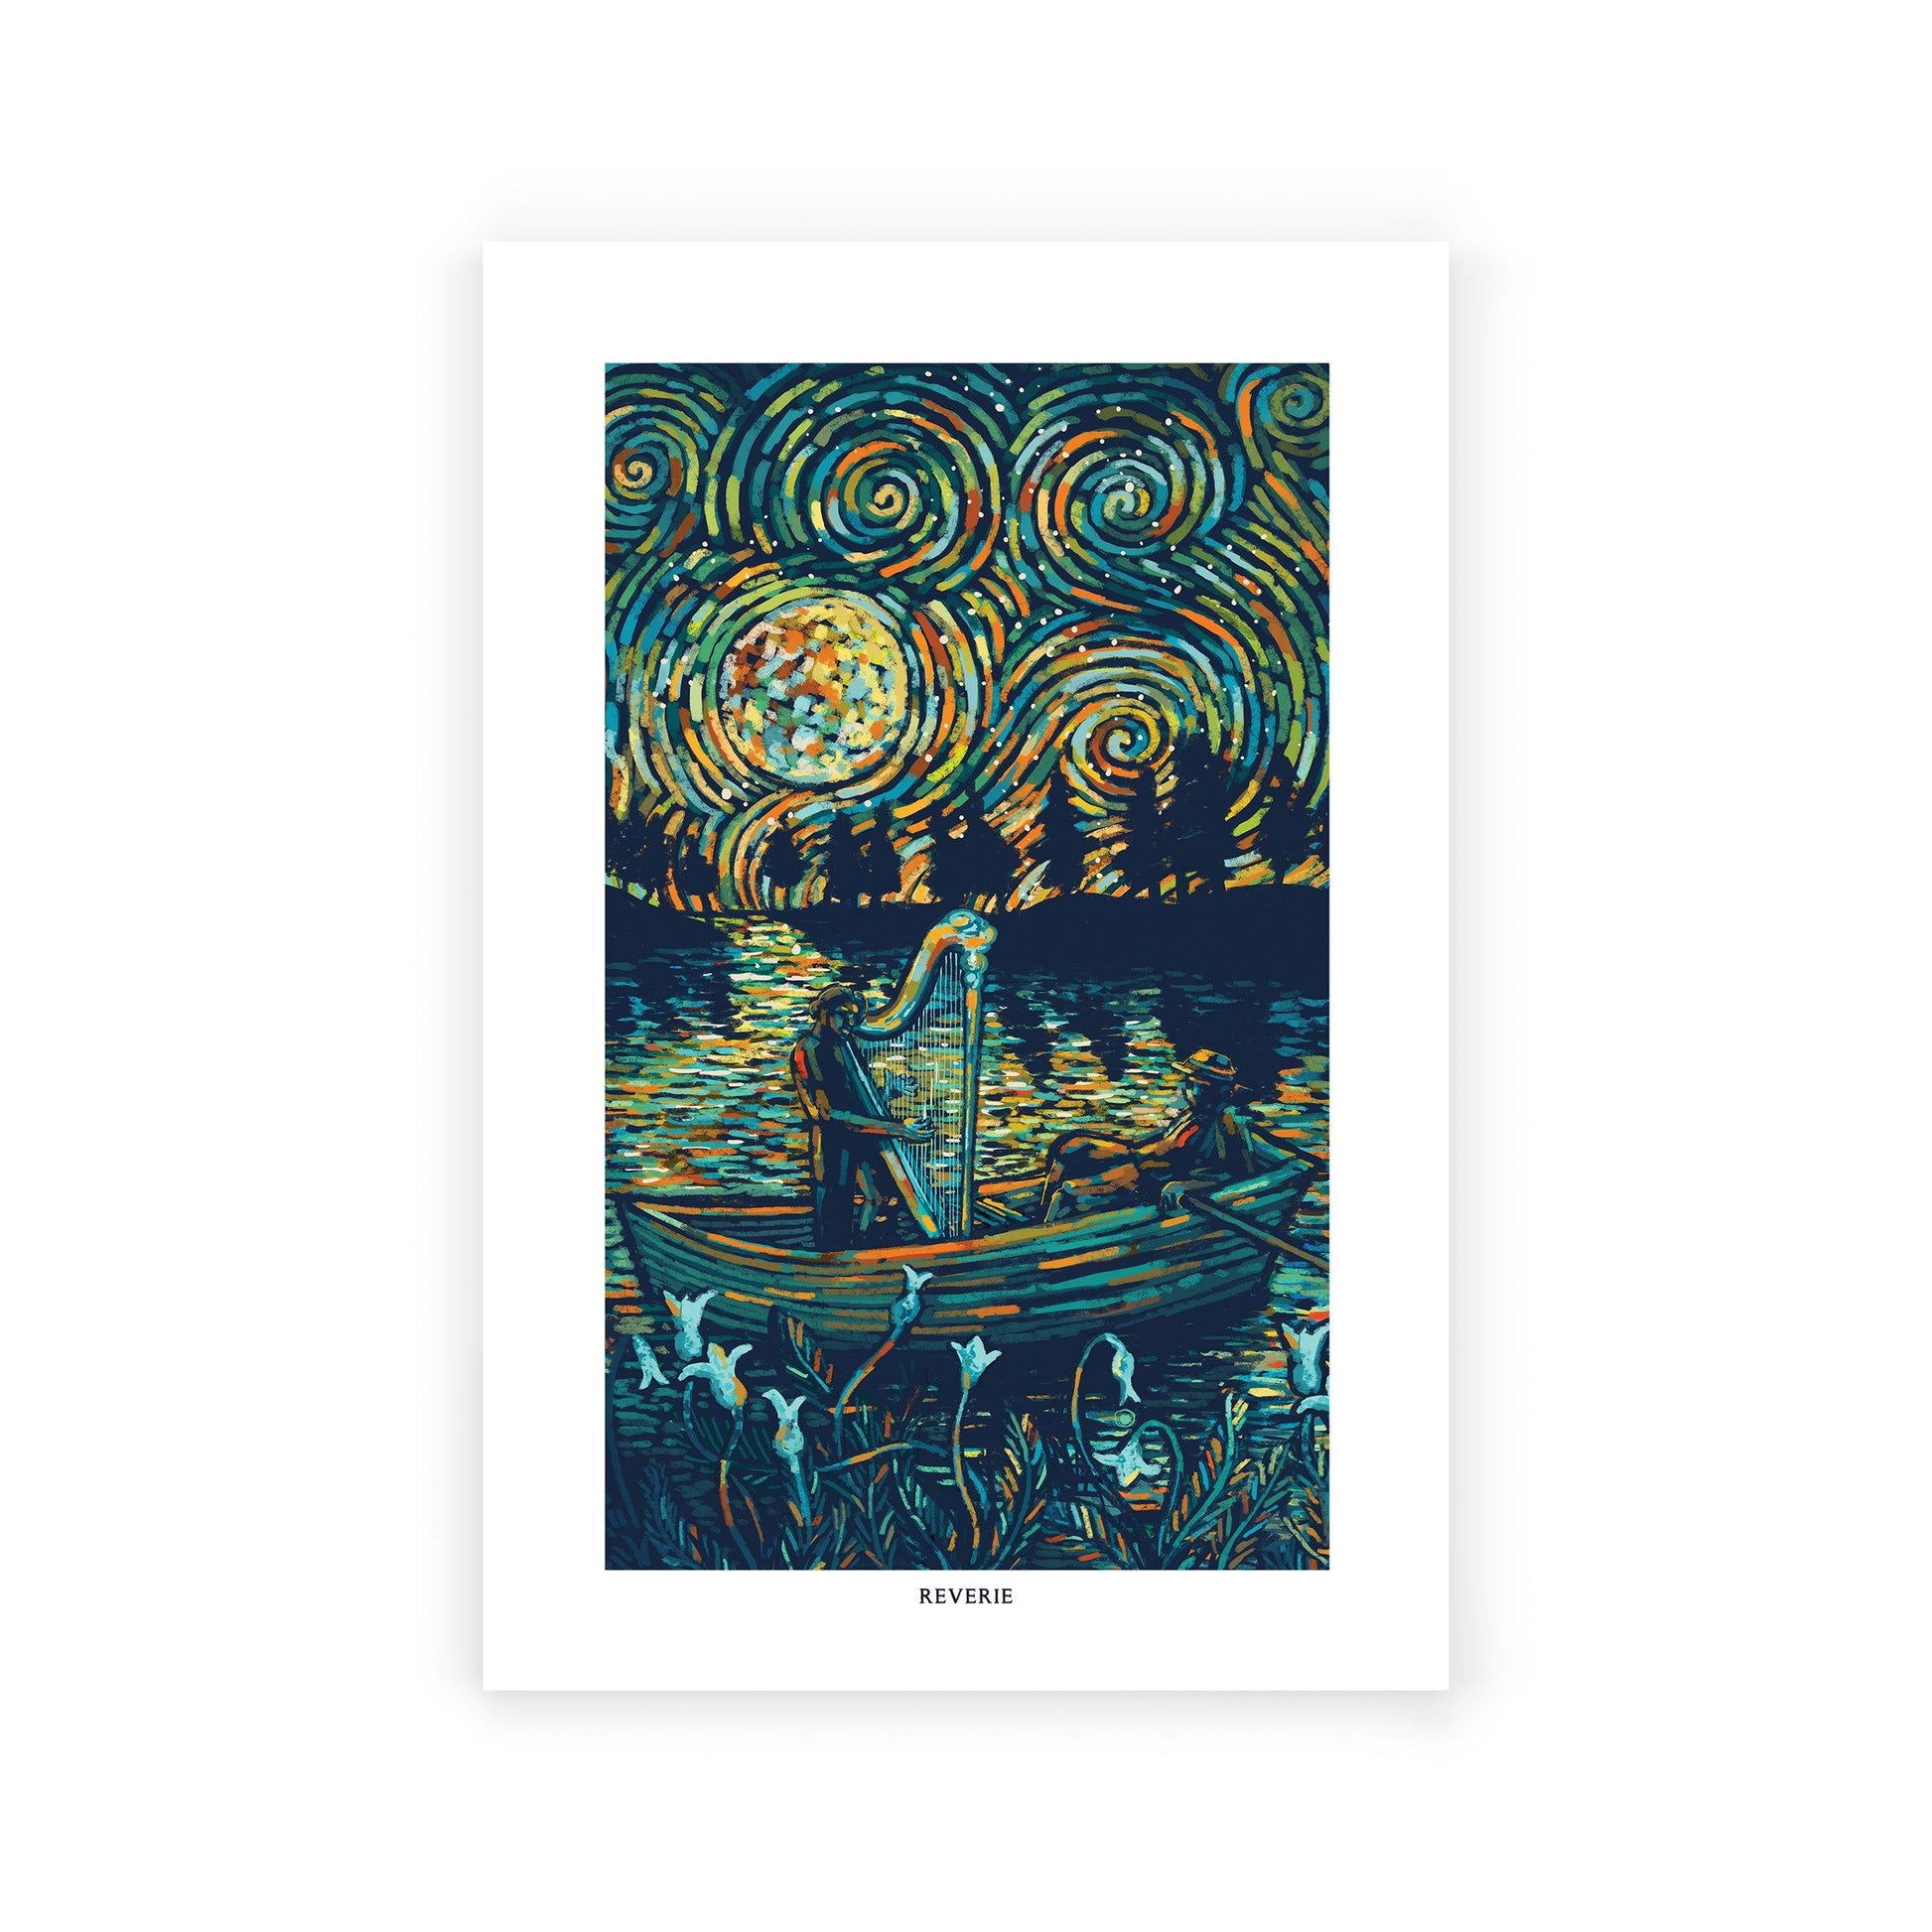 Reverie (Limited Edition of 300) Print James R. Eads